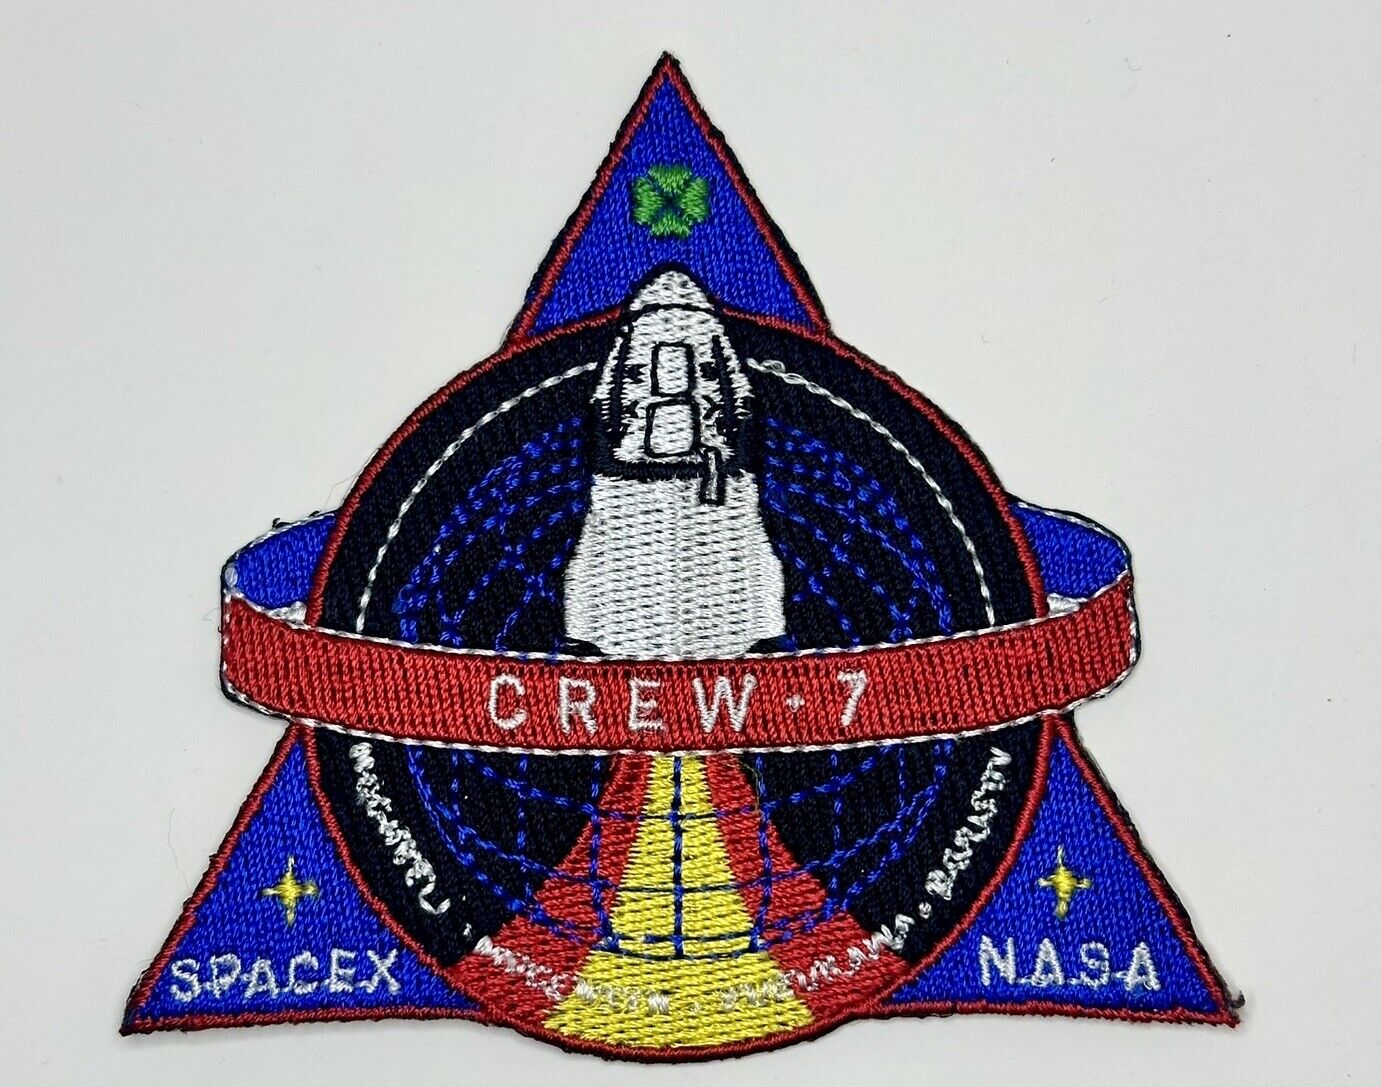 OrIginal SPACEX  CREW 7 ISS MISSION - SPC  CREW DRAGON- SPACE PATCH NASA